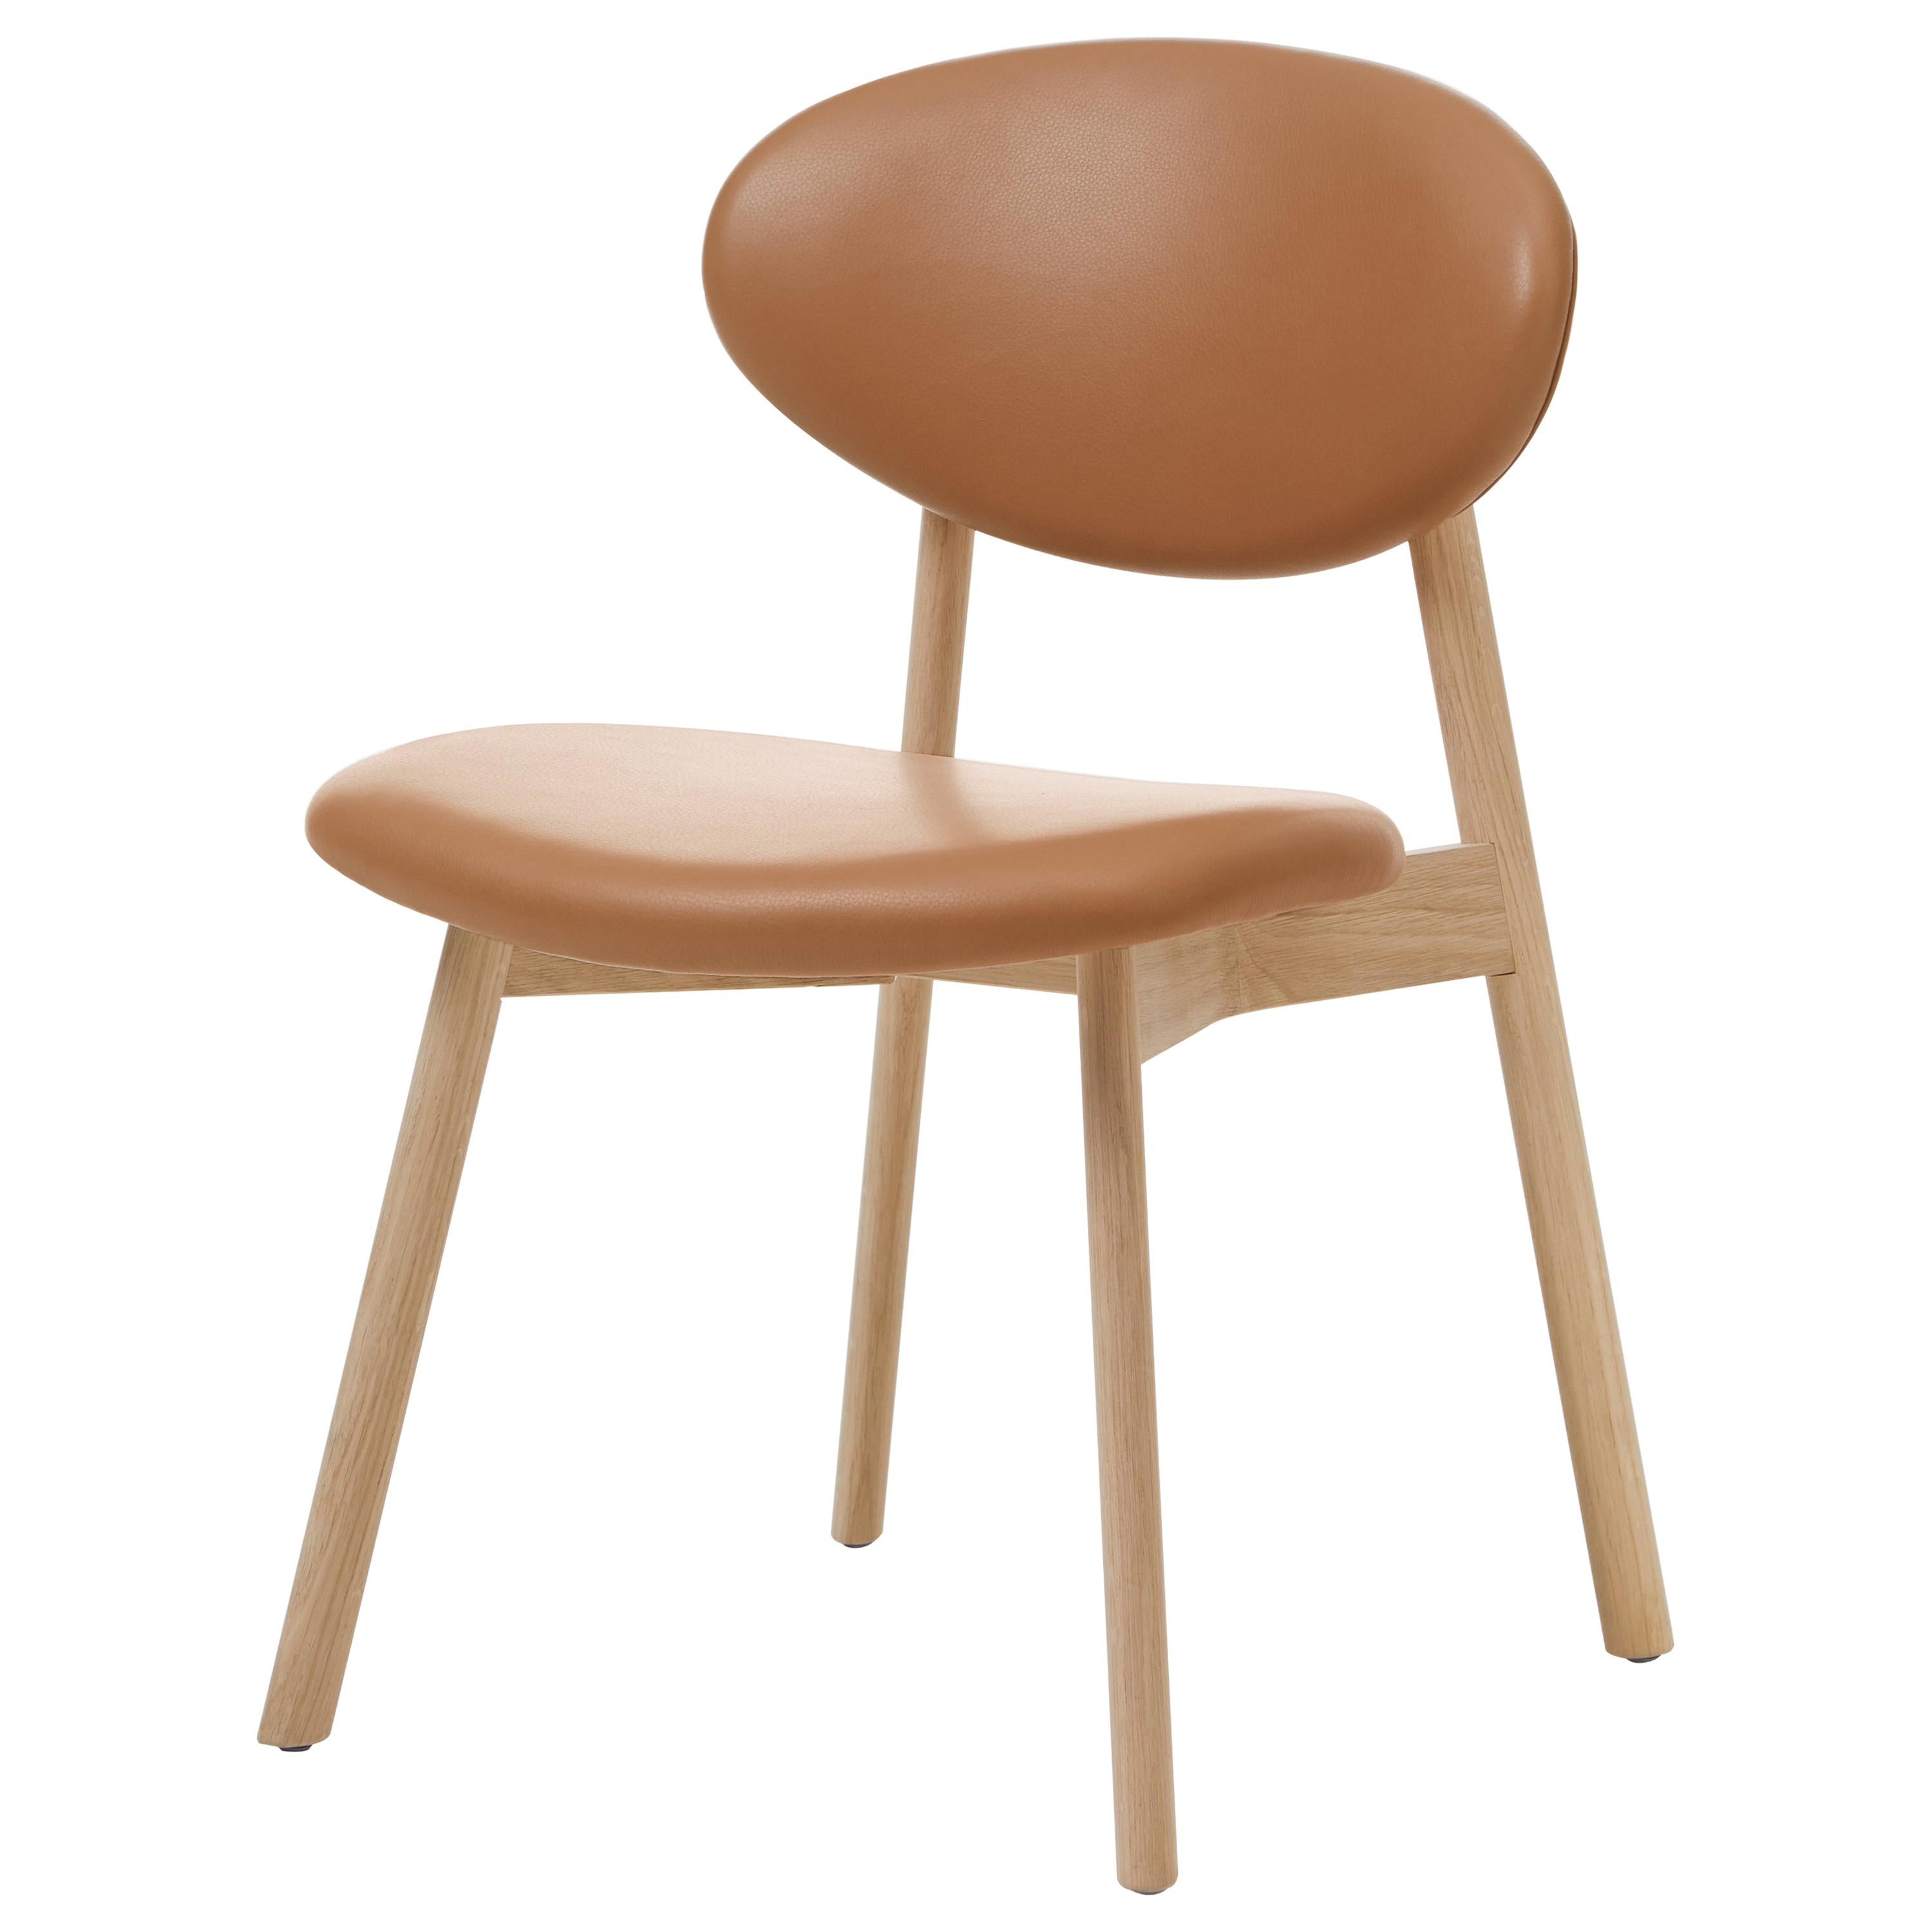 Ovoid Chair in Solid Oak, Raw Effect and Leather by Craig Bassam